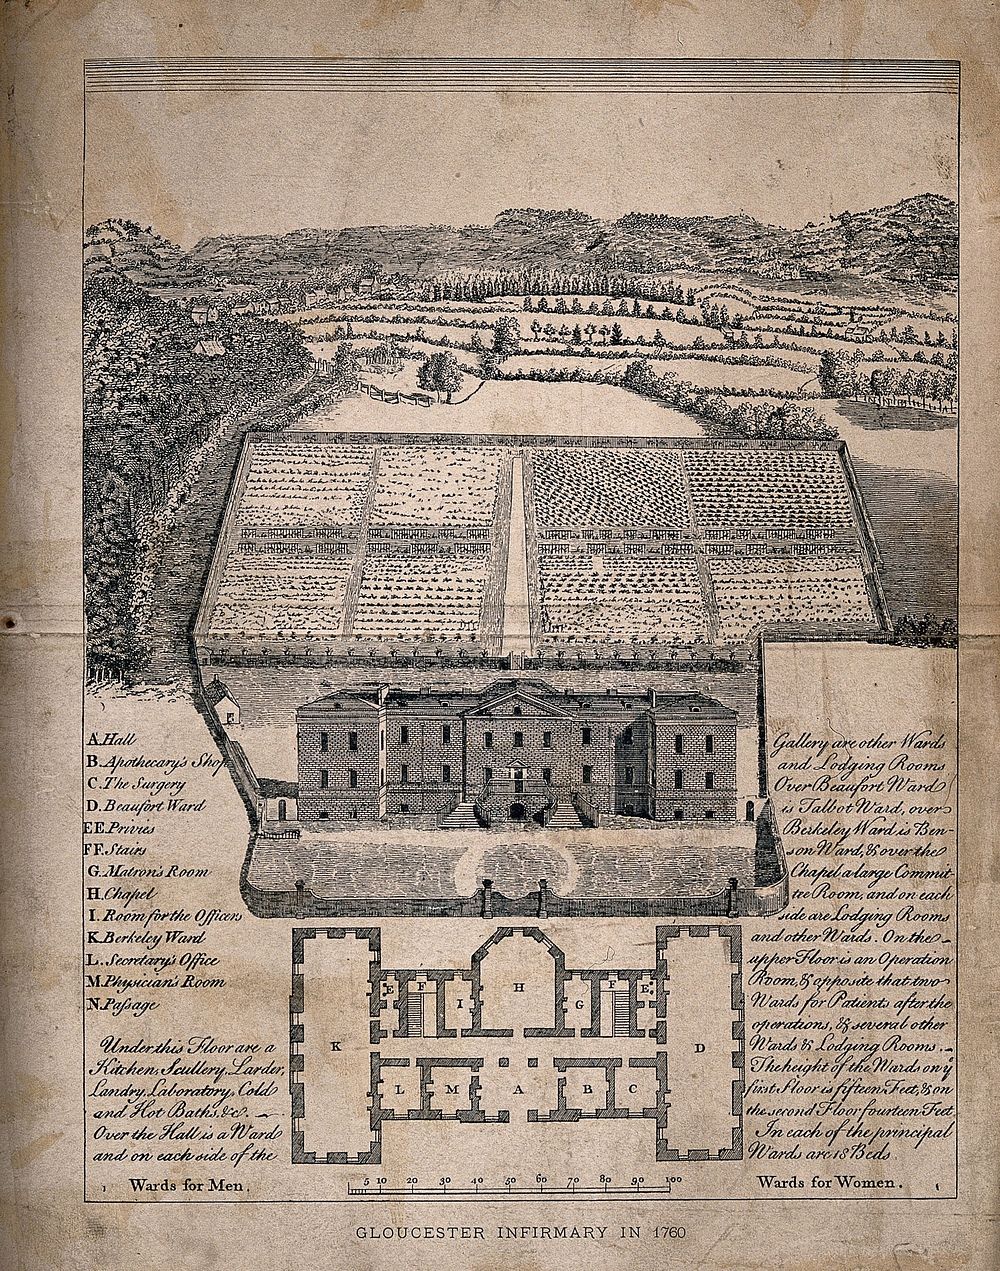 Gloucester Infirmary, England: with floor plan and printed text. Wood engraving.